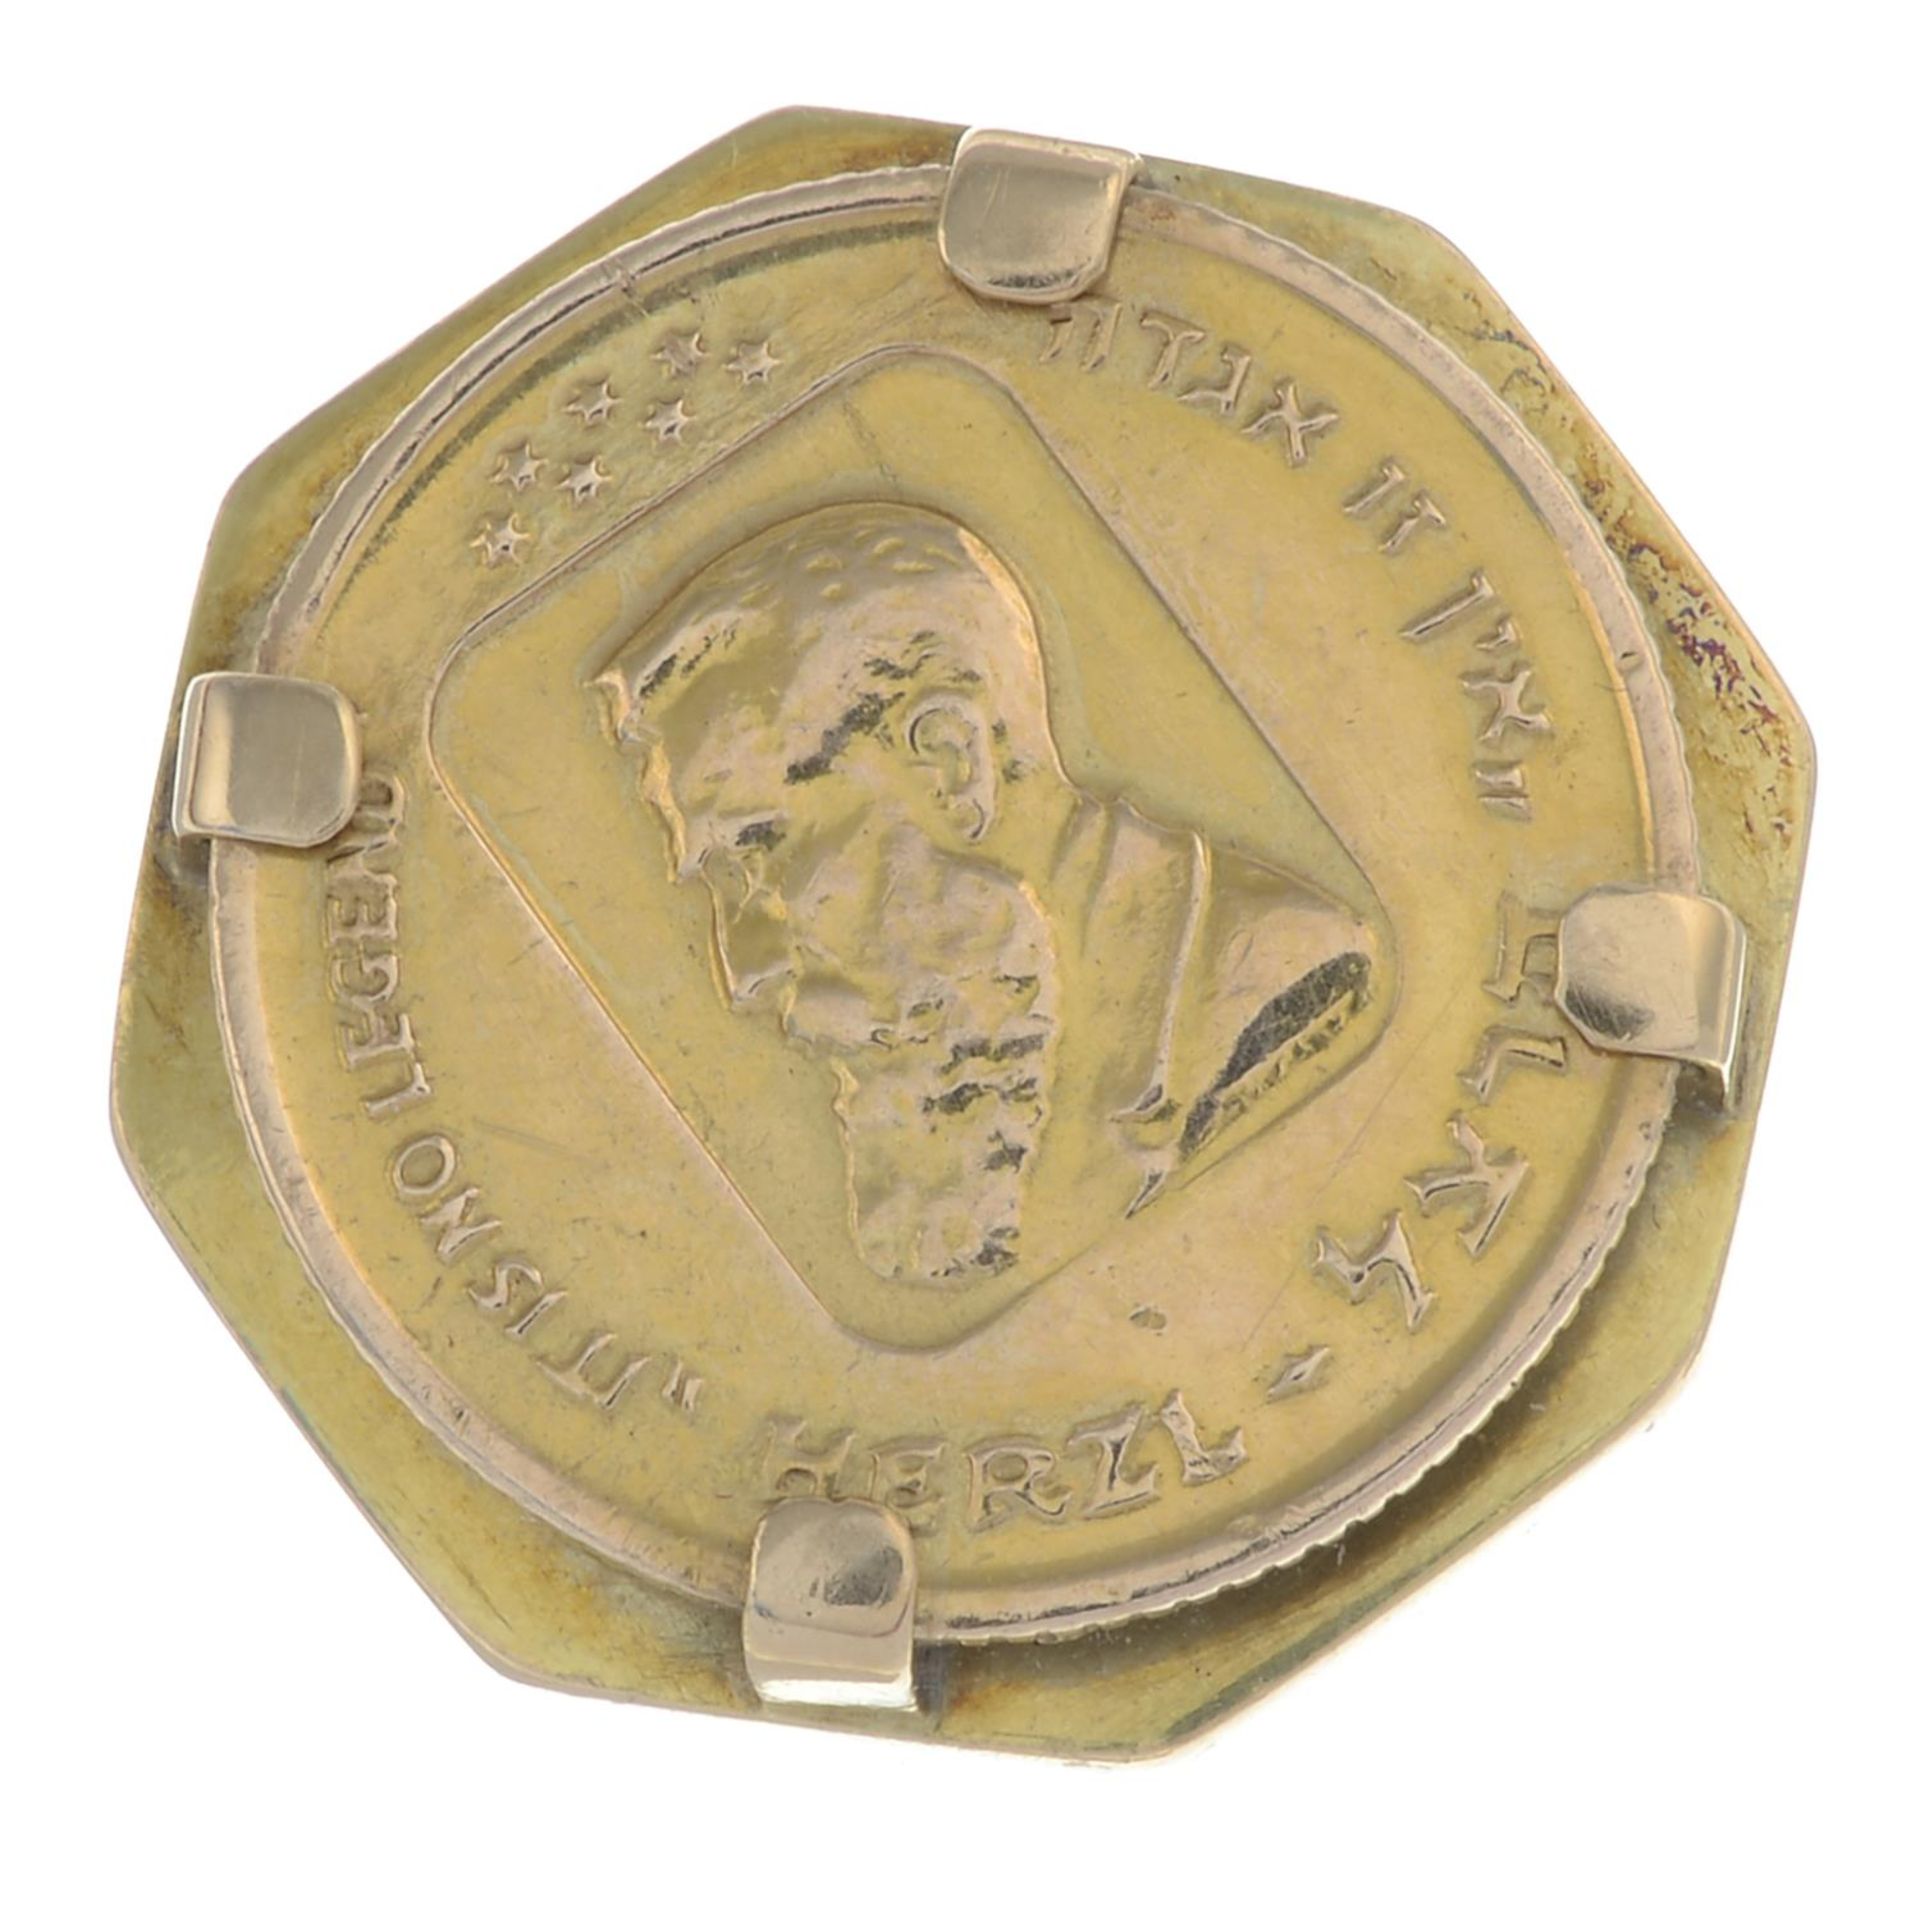 A mounted South African coin dress ring.